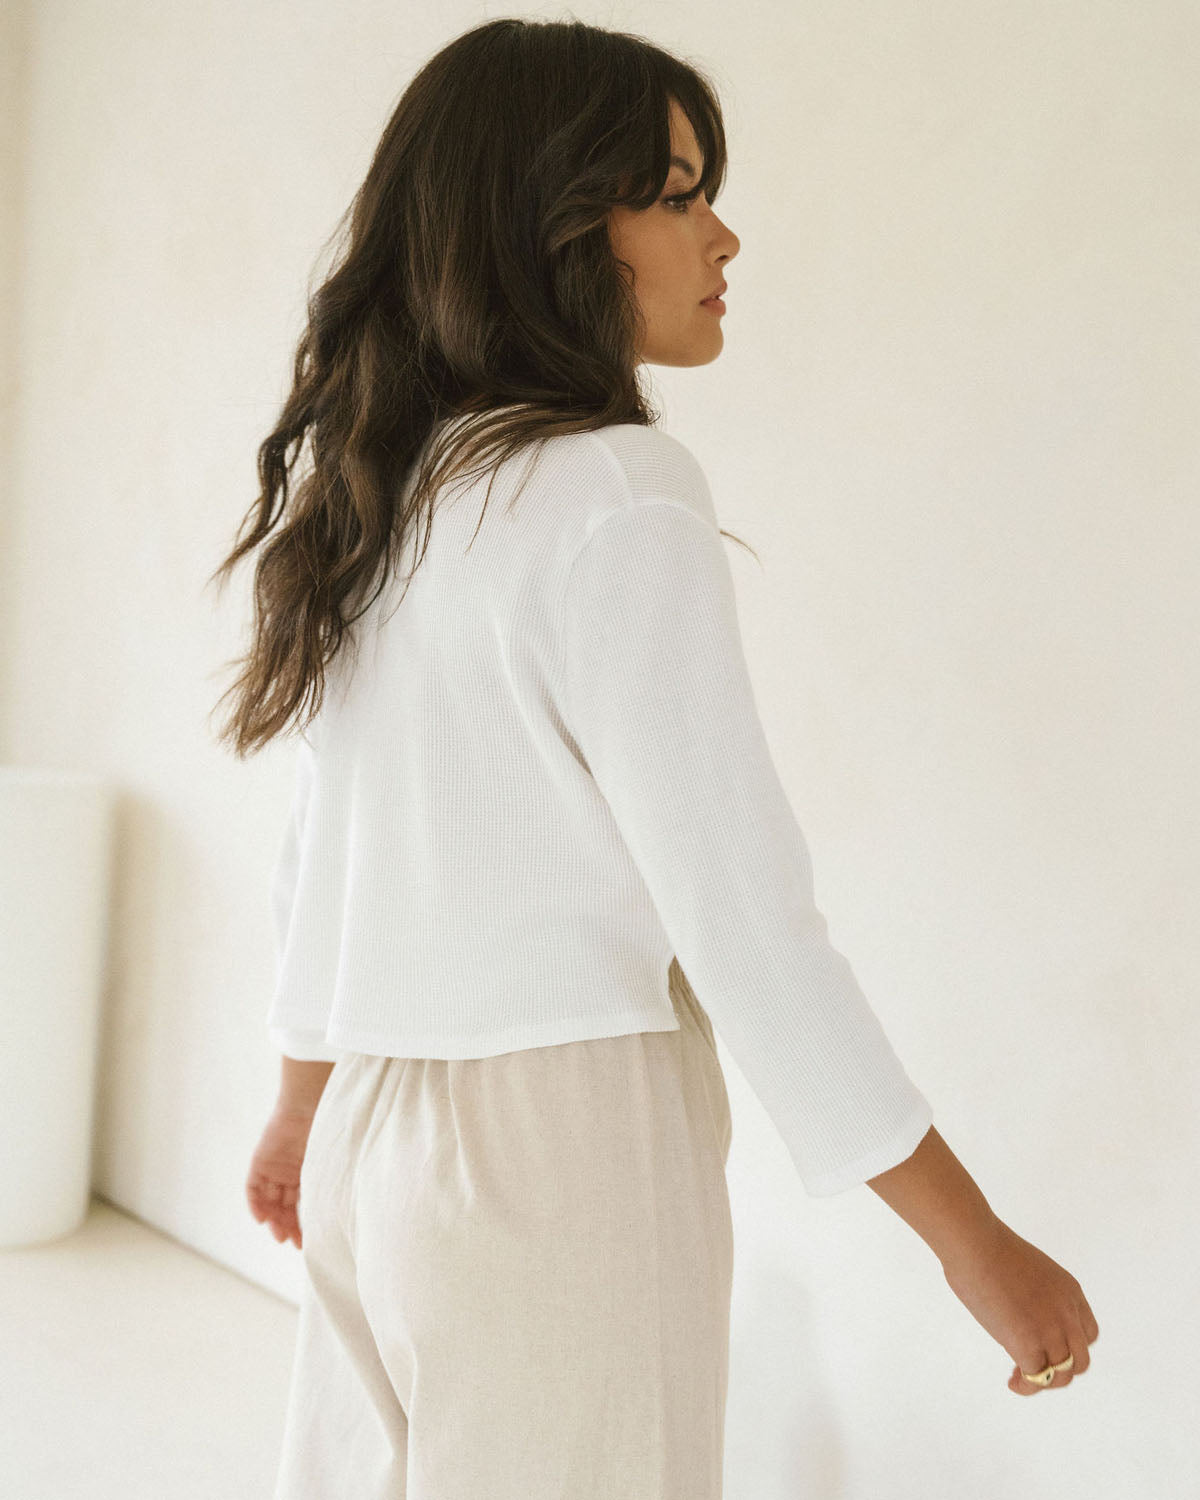 harly jae james blouse in white handmade in Vancouver with organic cotton